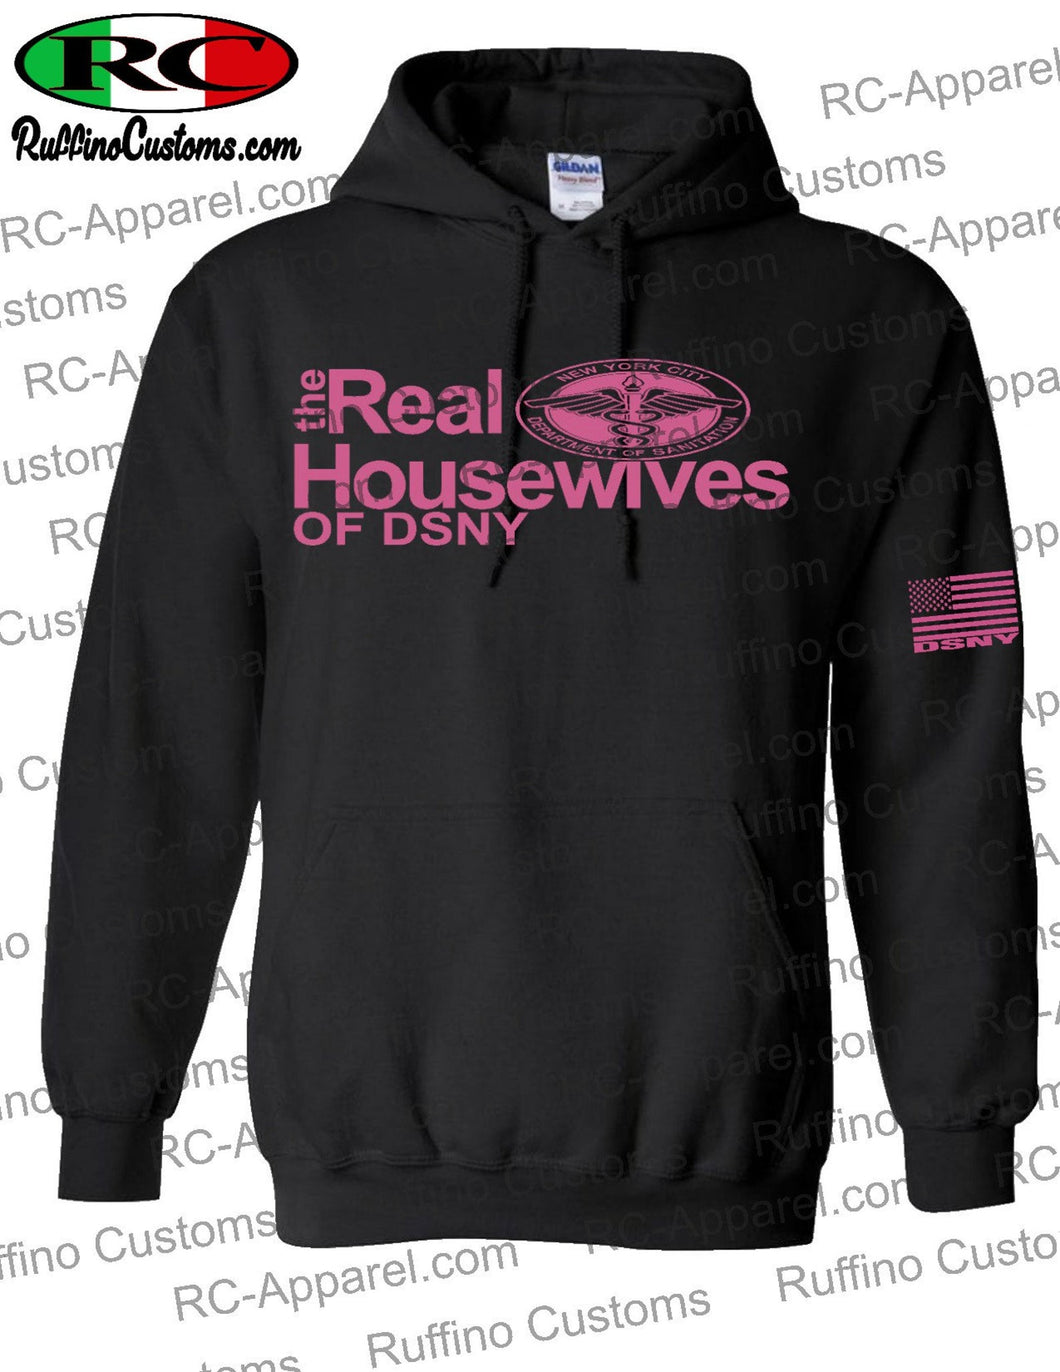 The Real Housewives Of DSNY Hoodie